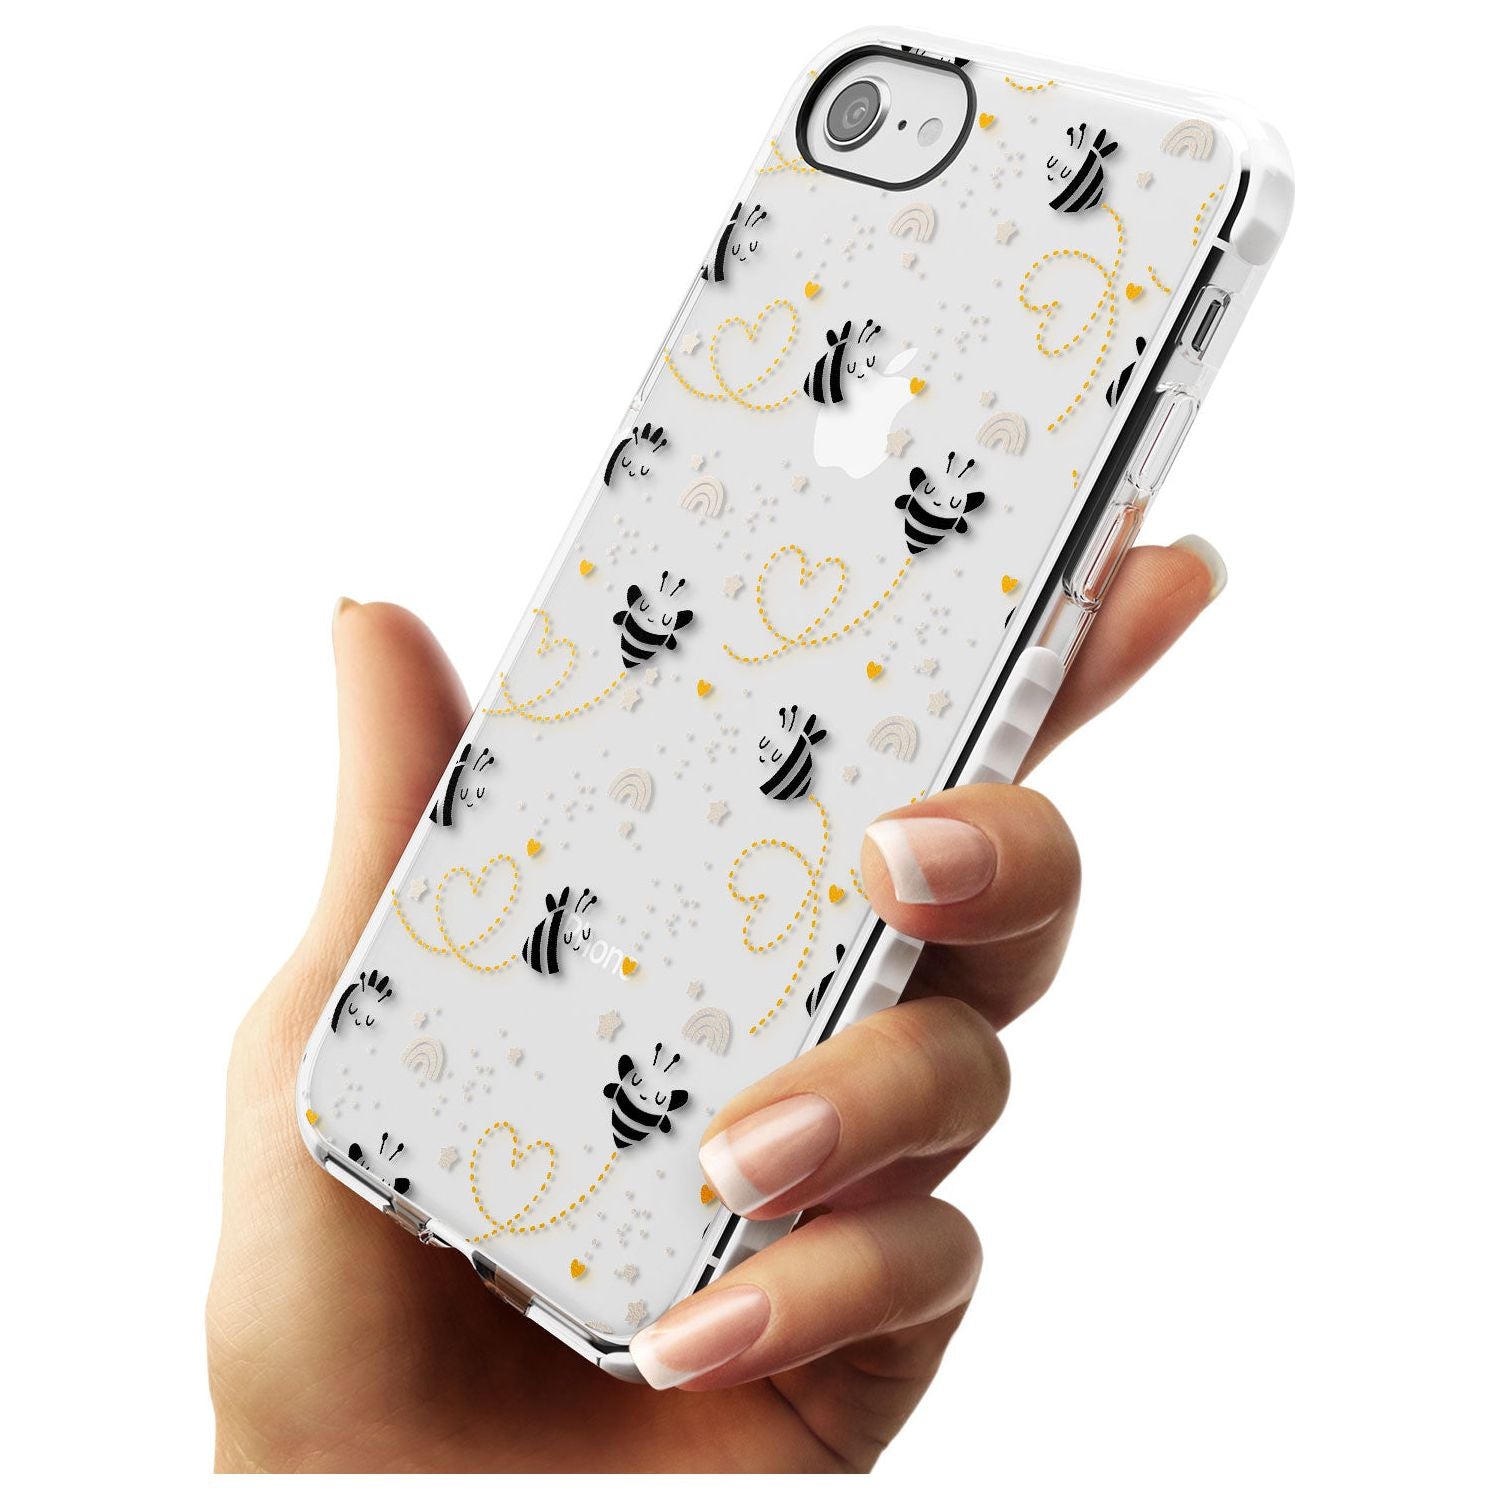 Sweet as Honey Patterns: Bees & Hearts (Clear) Impact Phone Case for iPhone SE 8 7 Plus